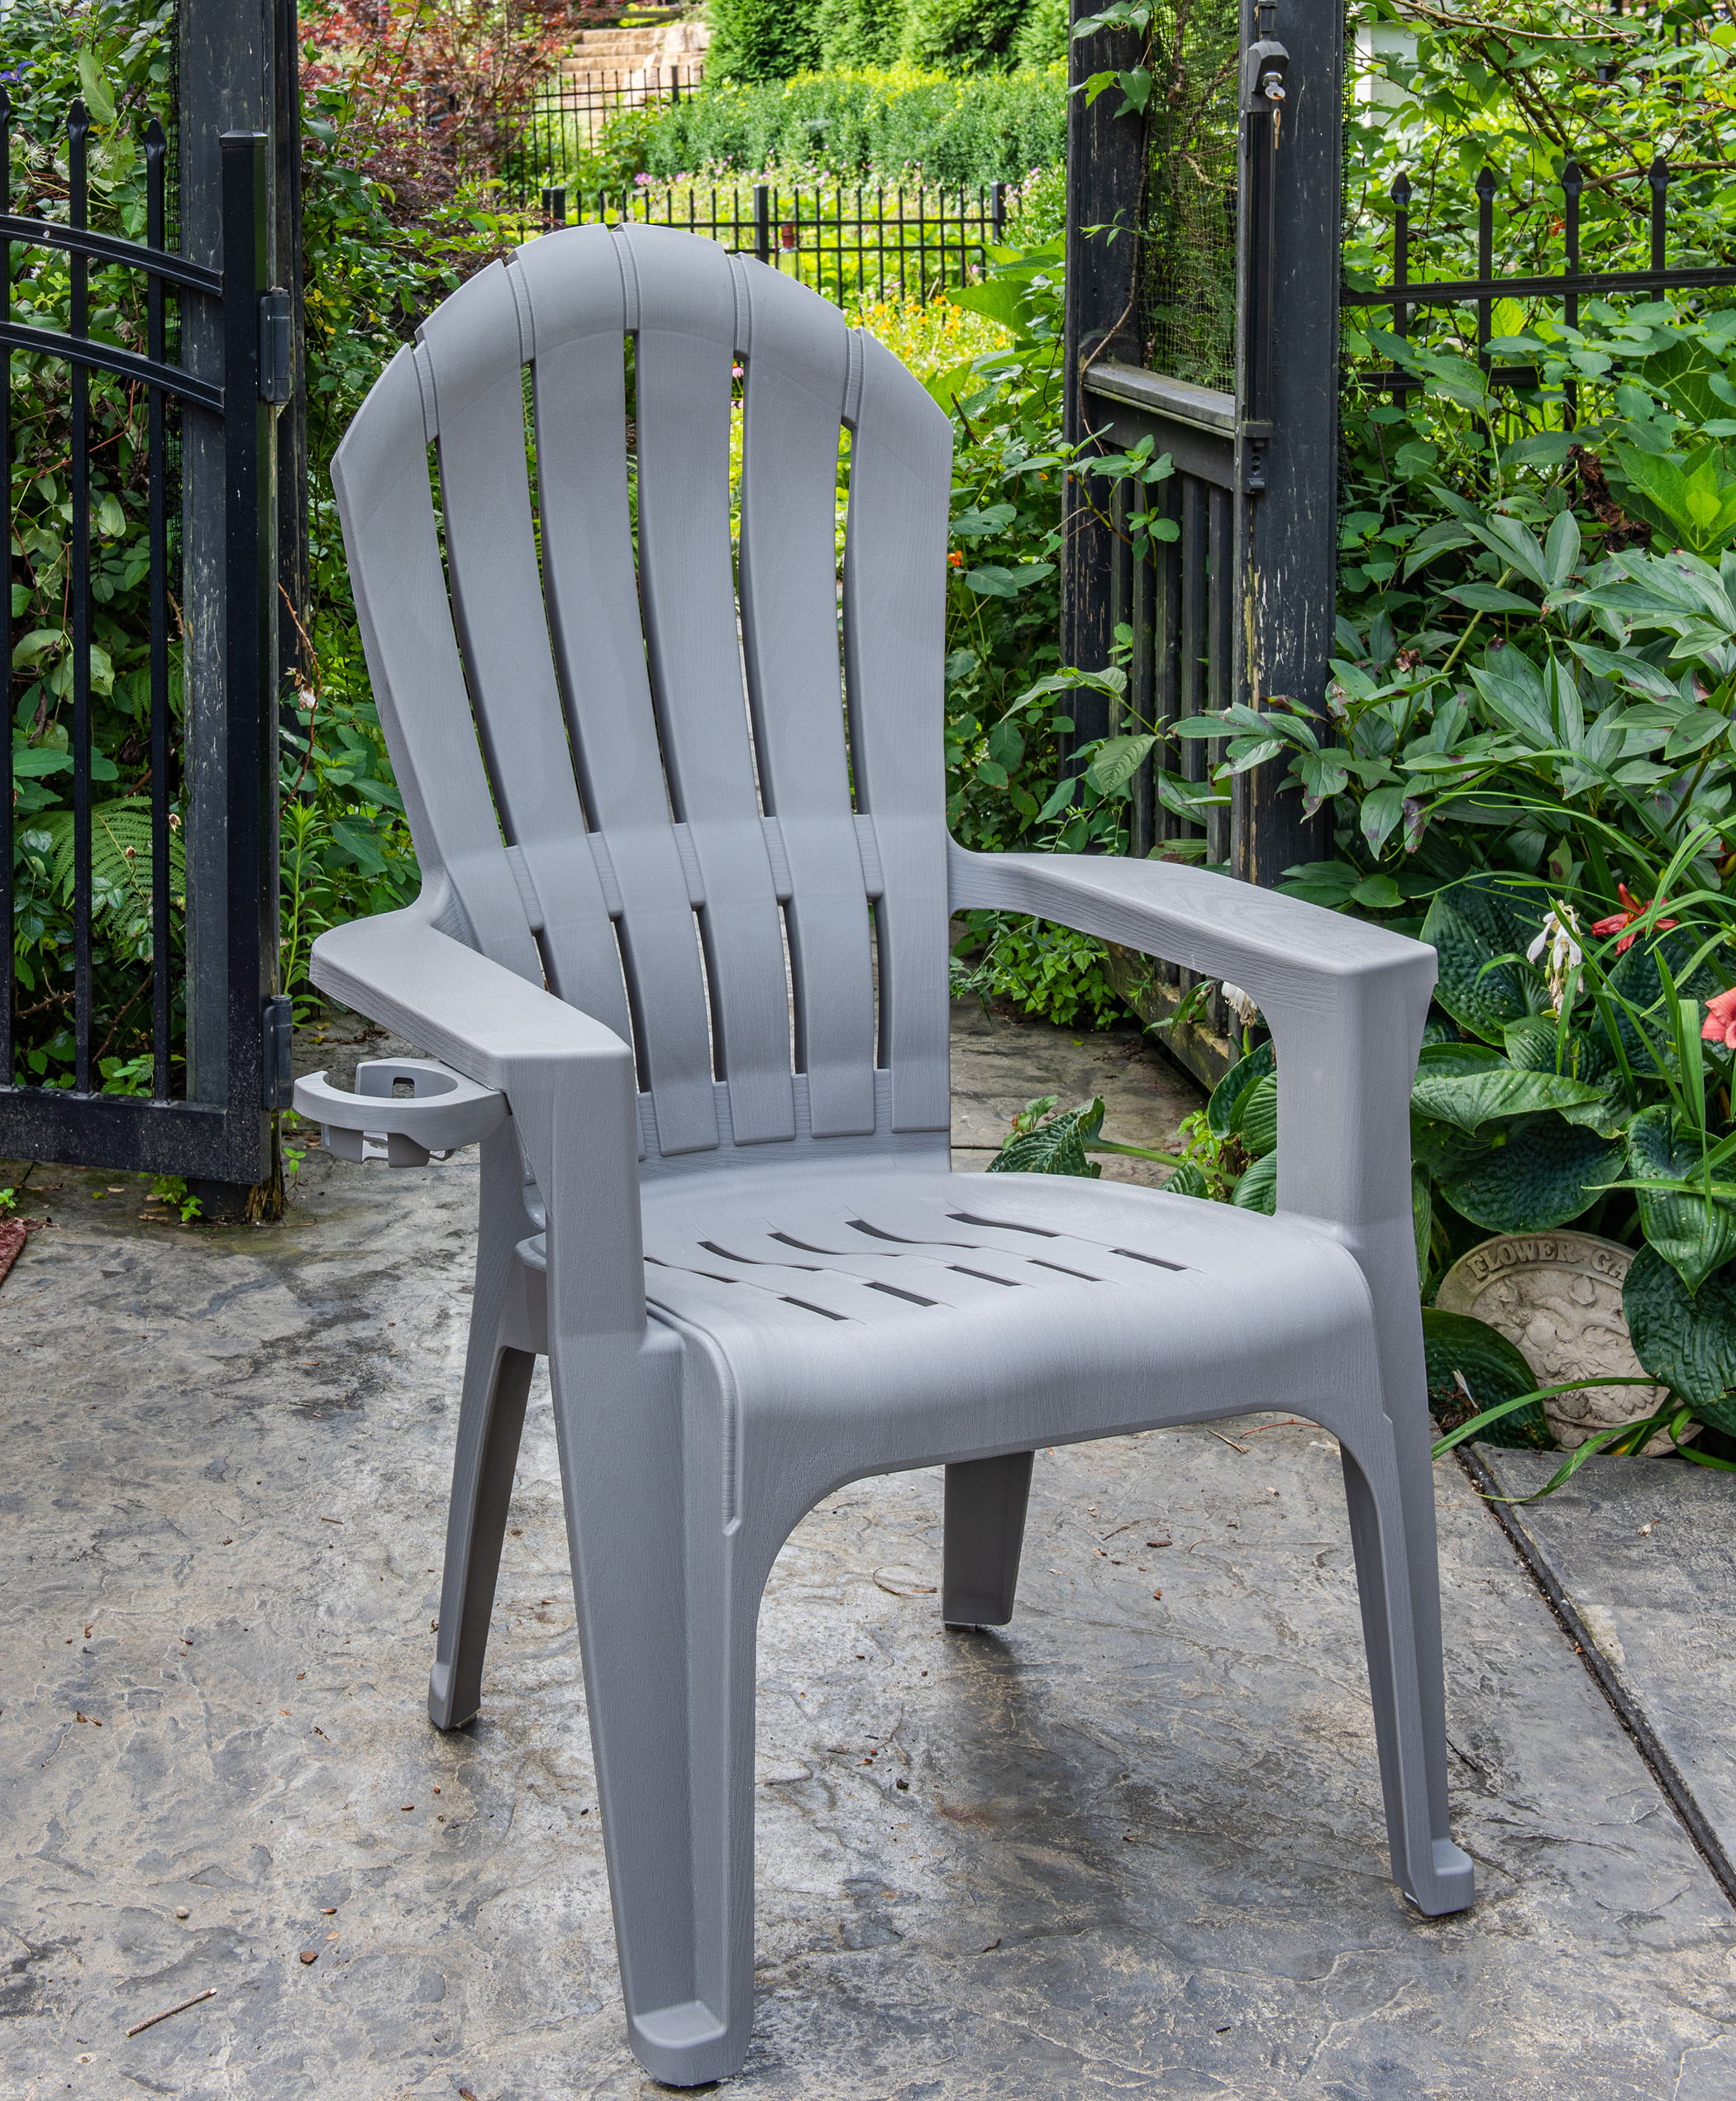 Adams Big Easy Outdoor Resin Adirondack Chair with Cup Holder, Gray